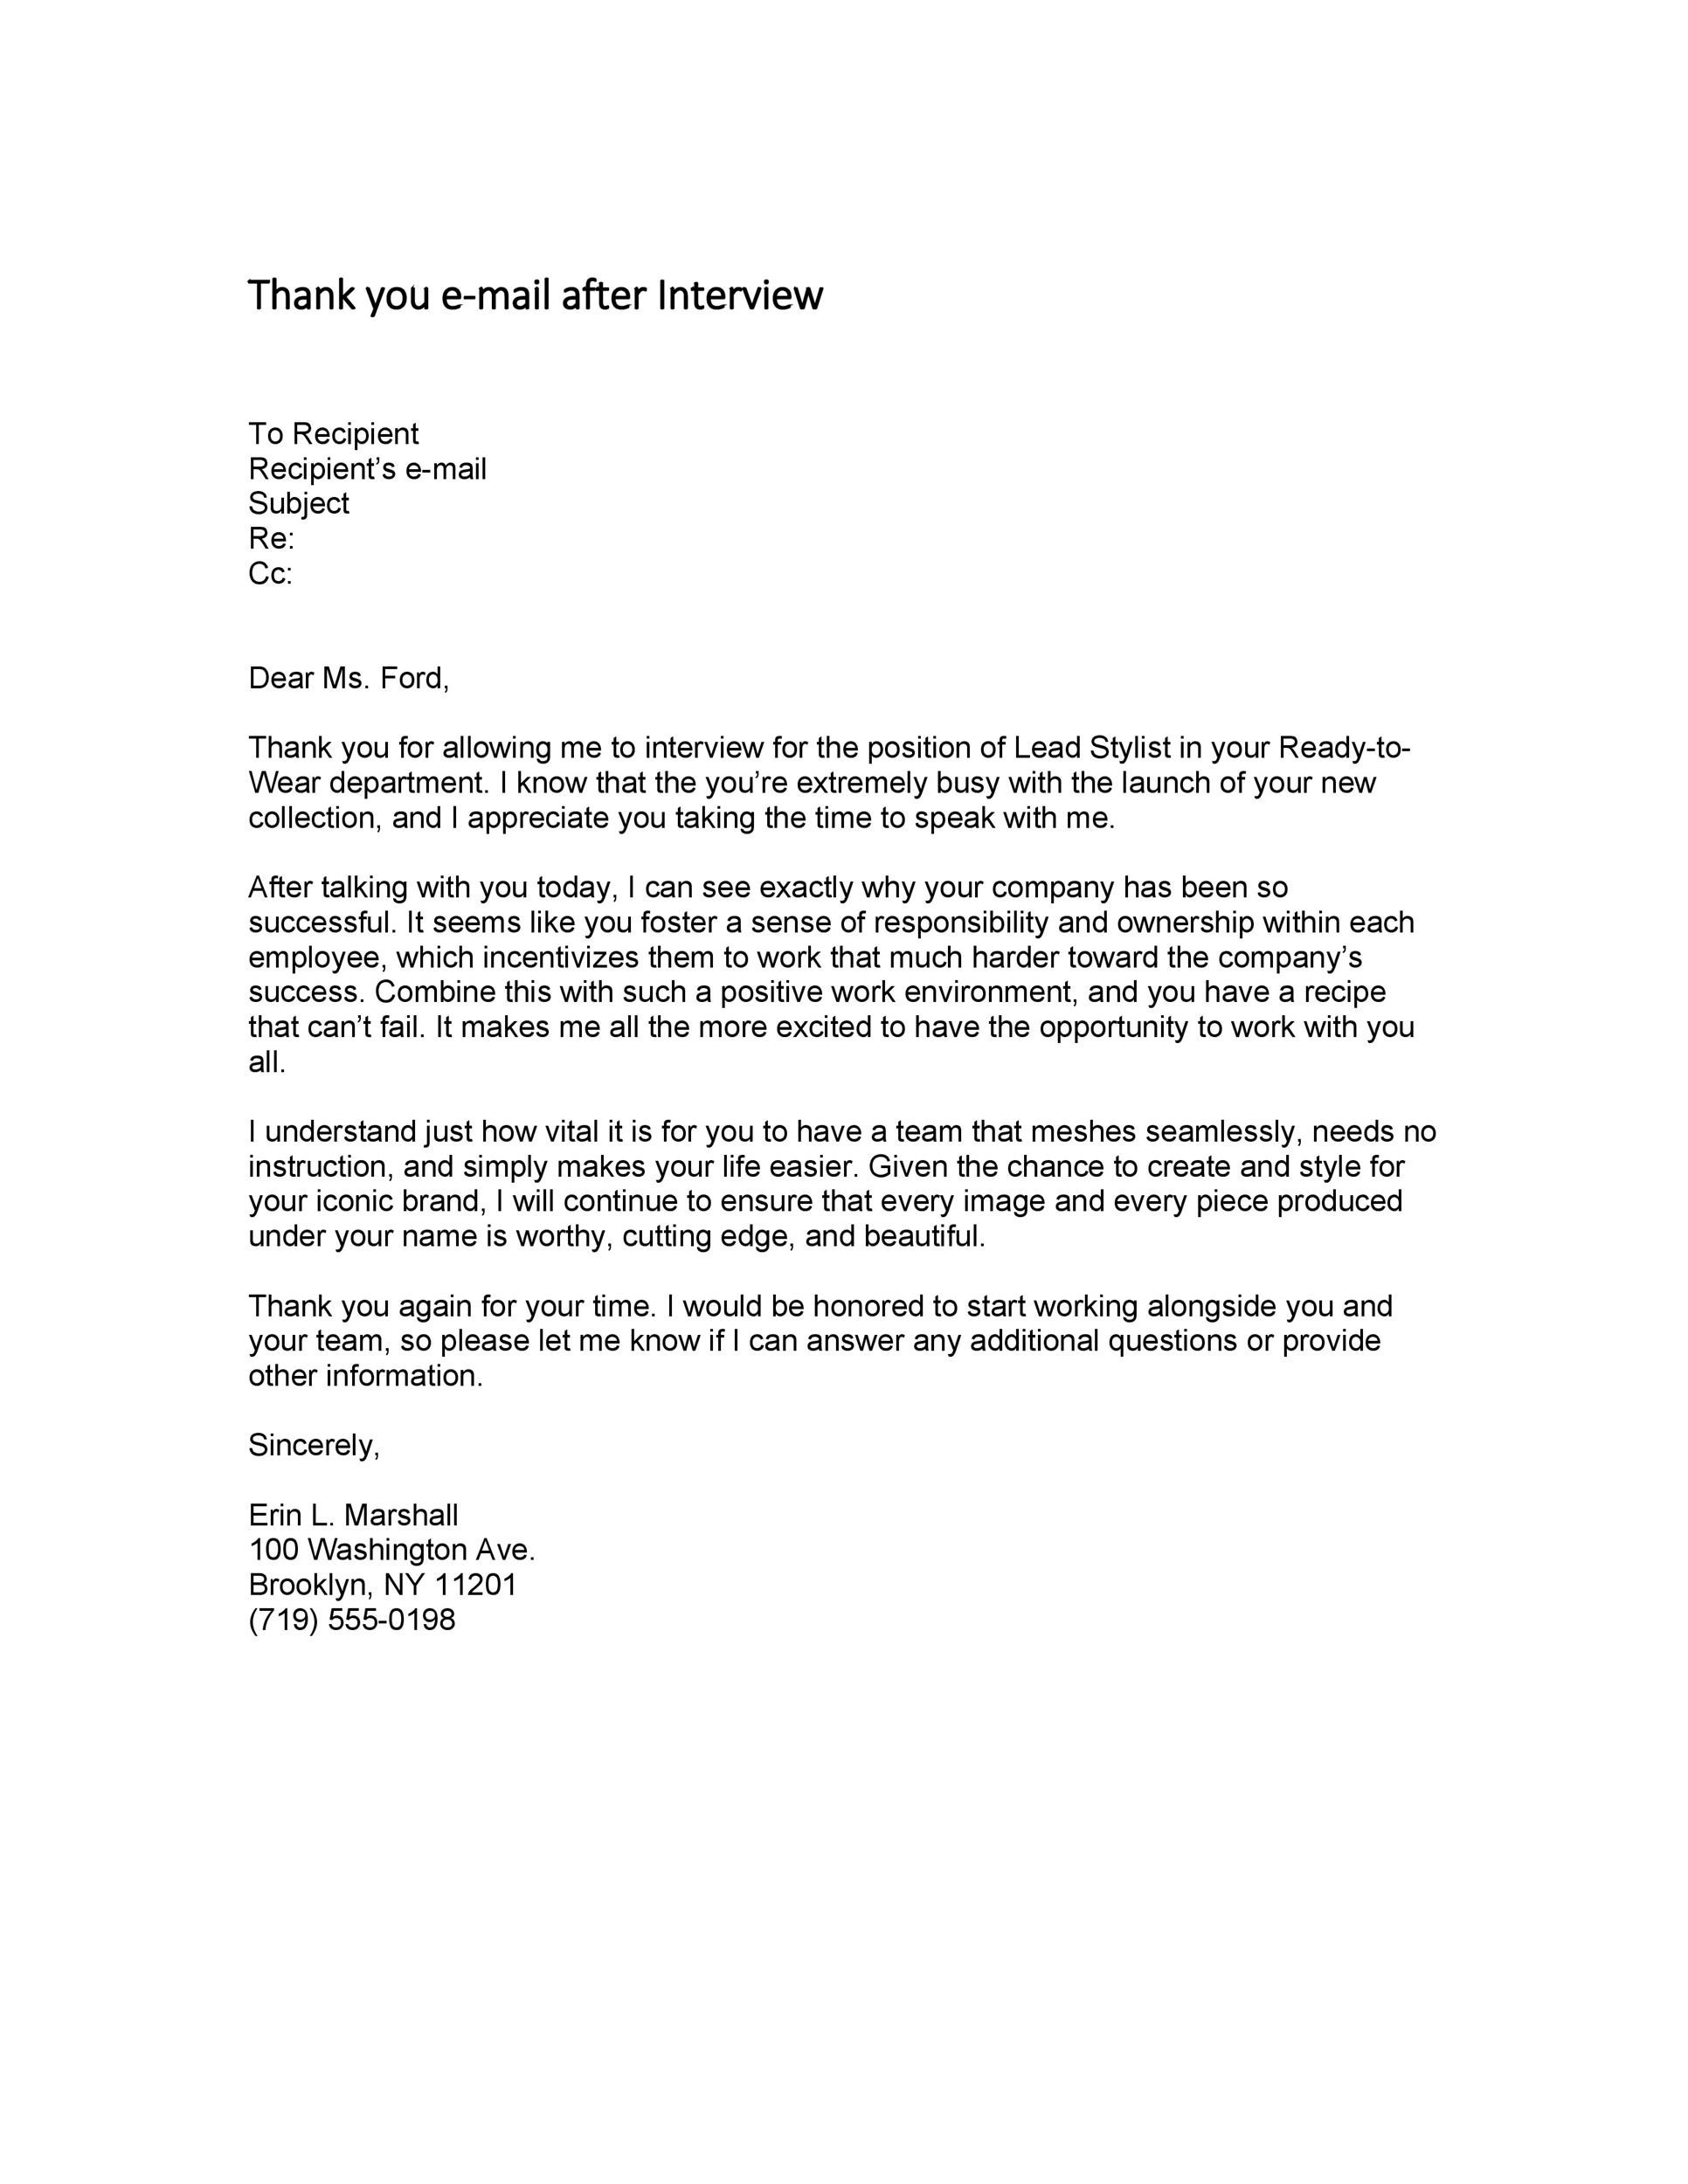 Thank You Letter After Interview Template from templatelab.com